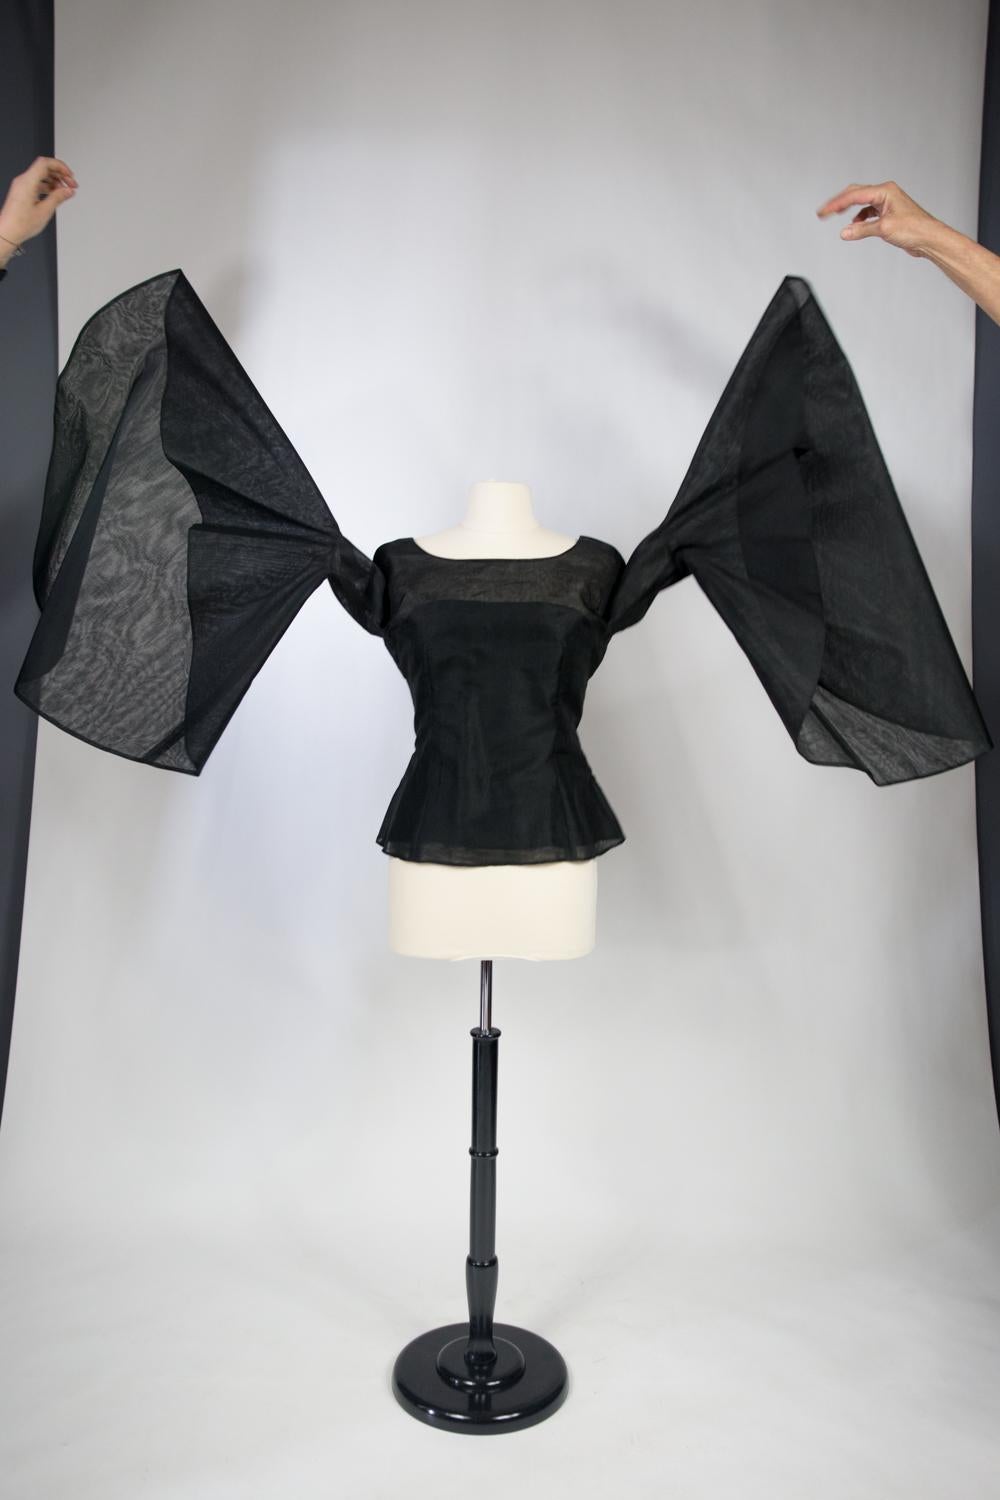 A Pierre Cardin Organza Blouse With Dramatic Batwing Sleeves Circa 1970/1980 For Sale 8